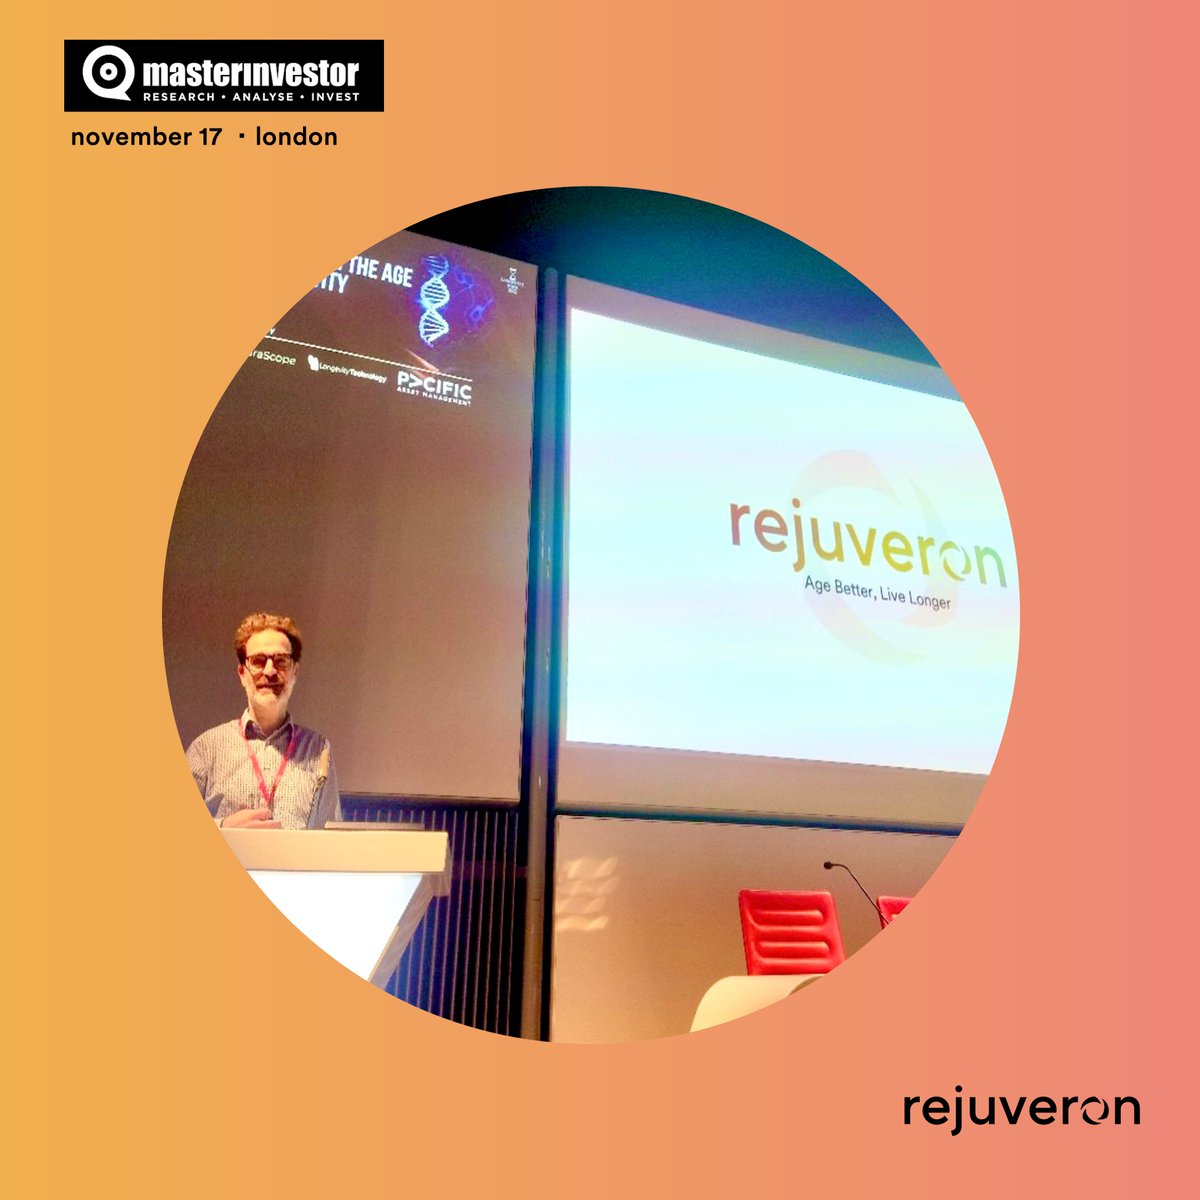 Spotlight on Stephen! Yesterday, our VP Discovery Biology, @mitomedicineman, shared exciting perspectives on #healthyaging at “Investing in the age of #longevity” and explained how @rejuveron_life aims to cure high unmet medical needs with a #novel therapeutic #paradigm.